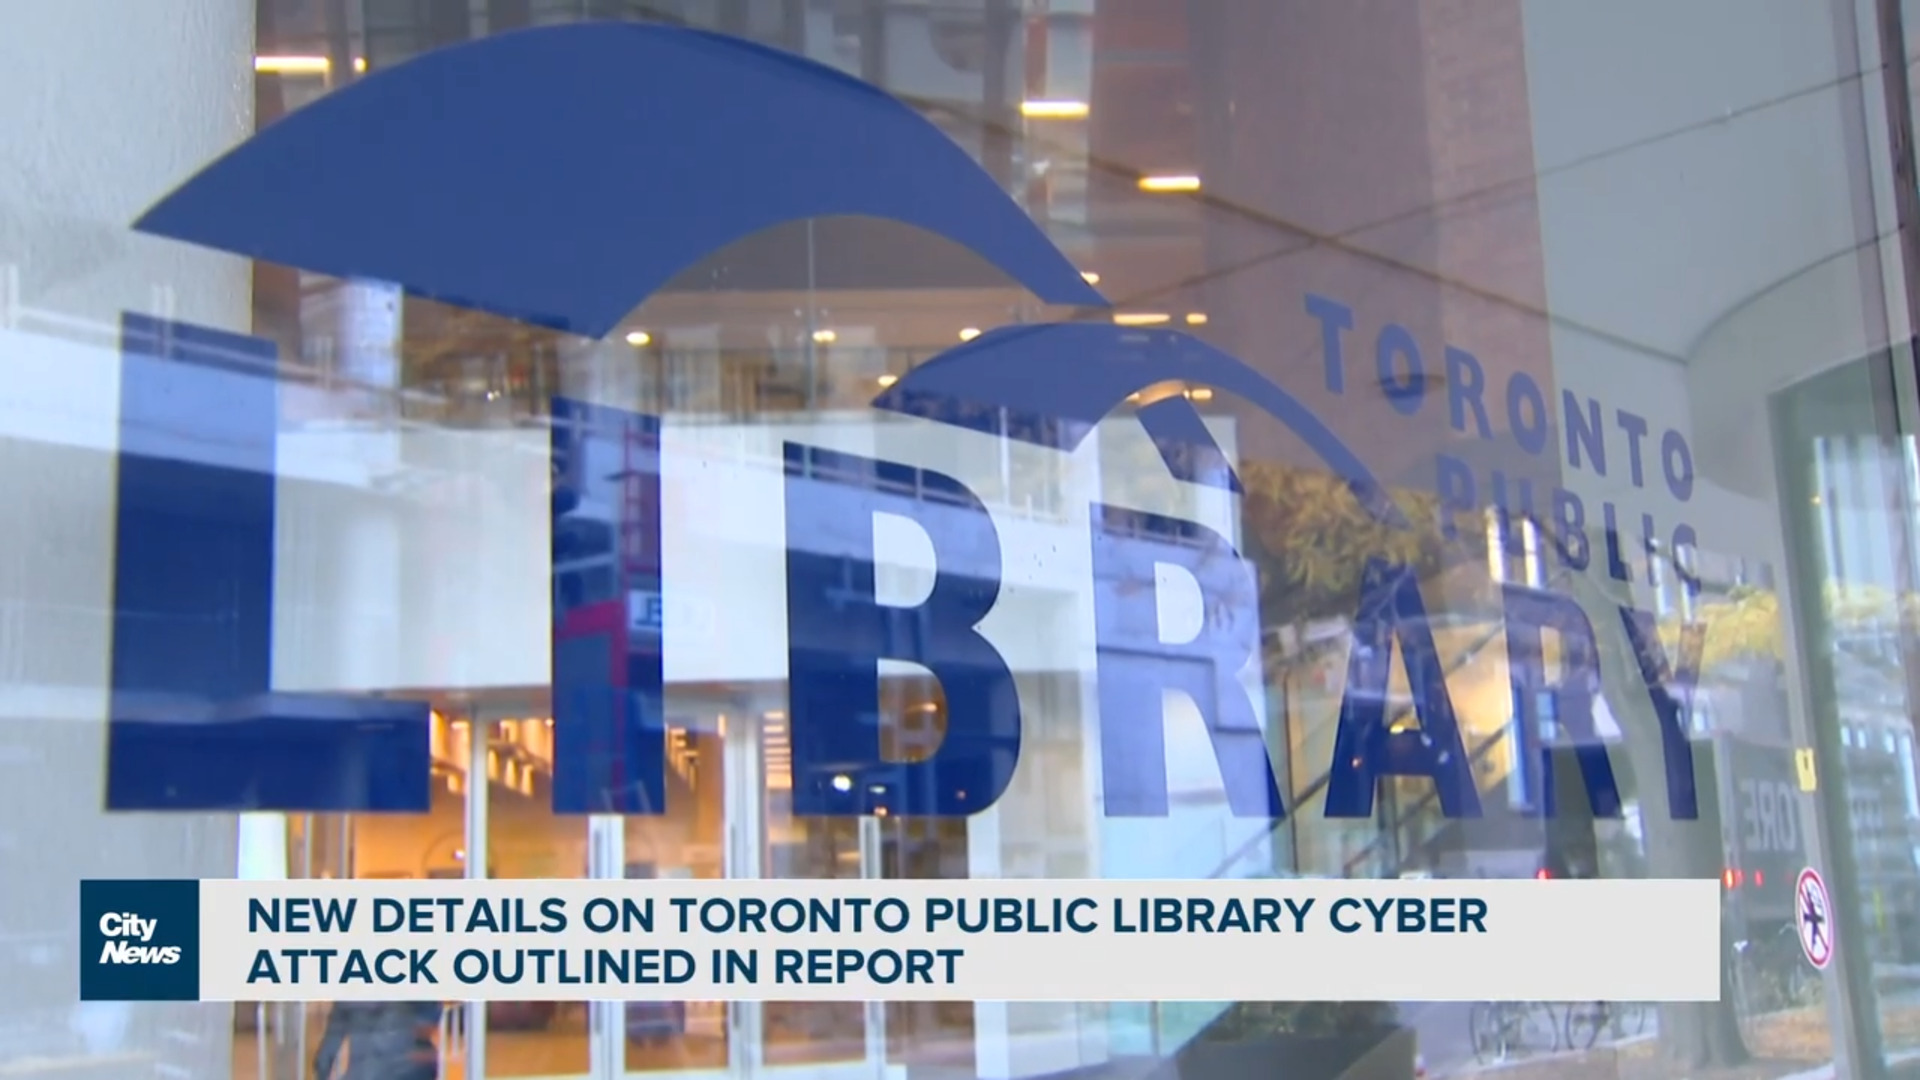 Toronto Public Library cyber-attack report finds user data may have been compromised